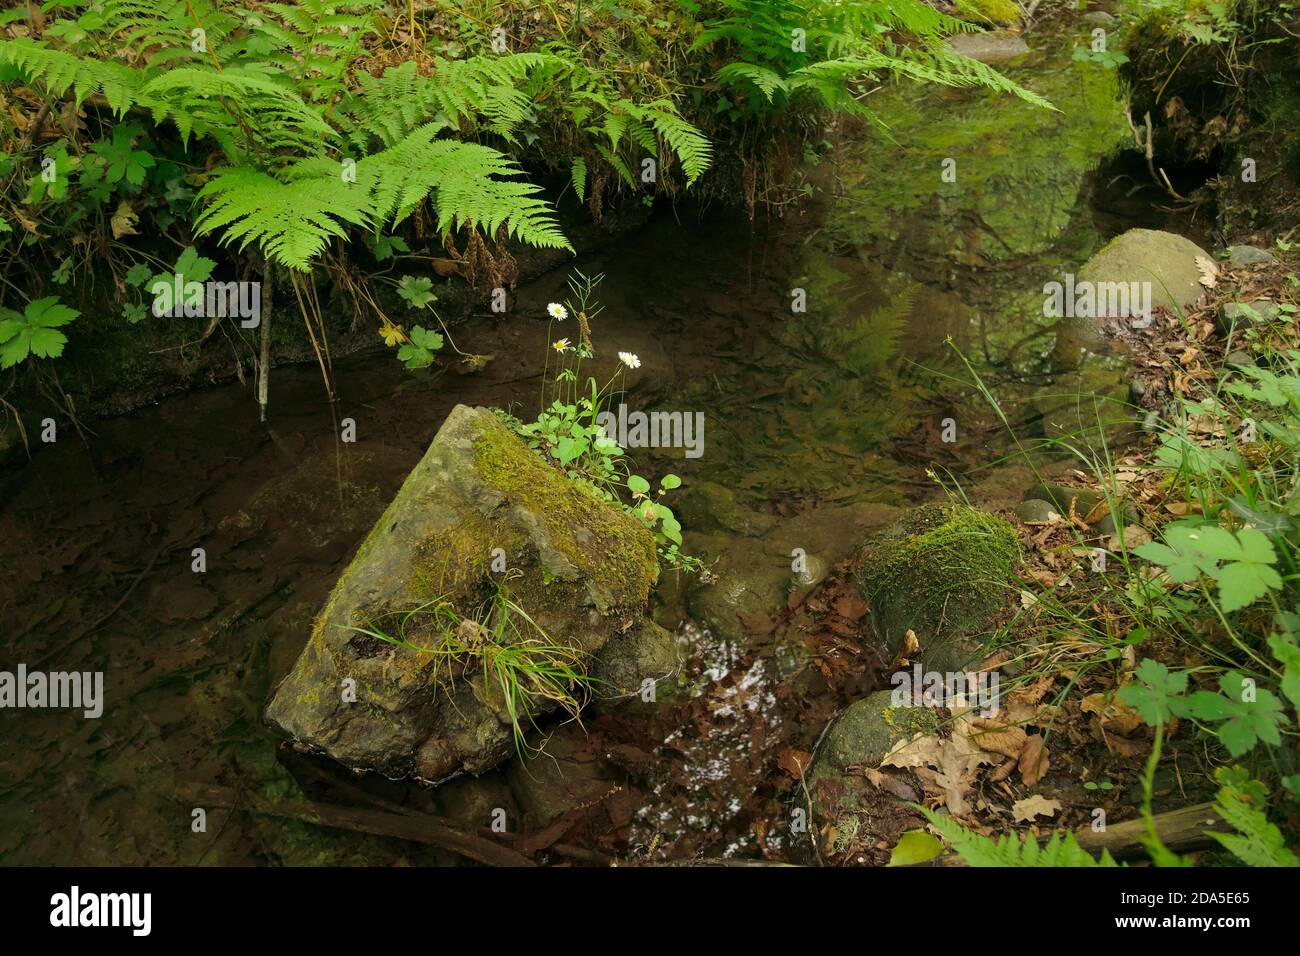 white wild daisies on mossy stone into small water pond surrounded by ferns in Malabotta Wood, Sicily Stock Photo